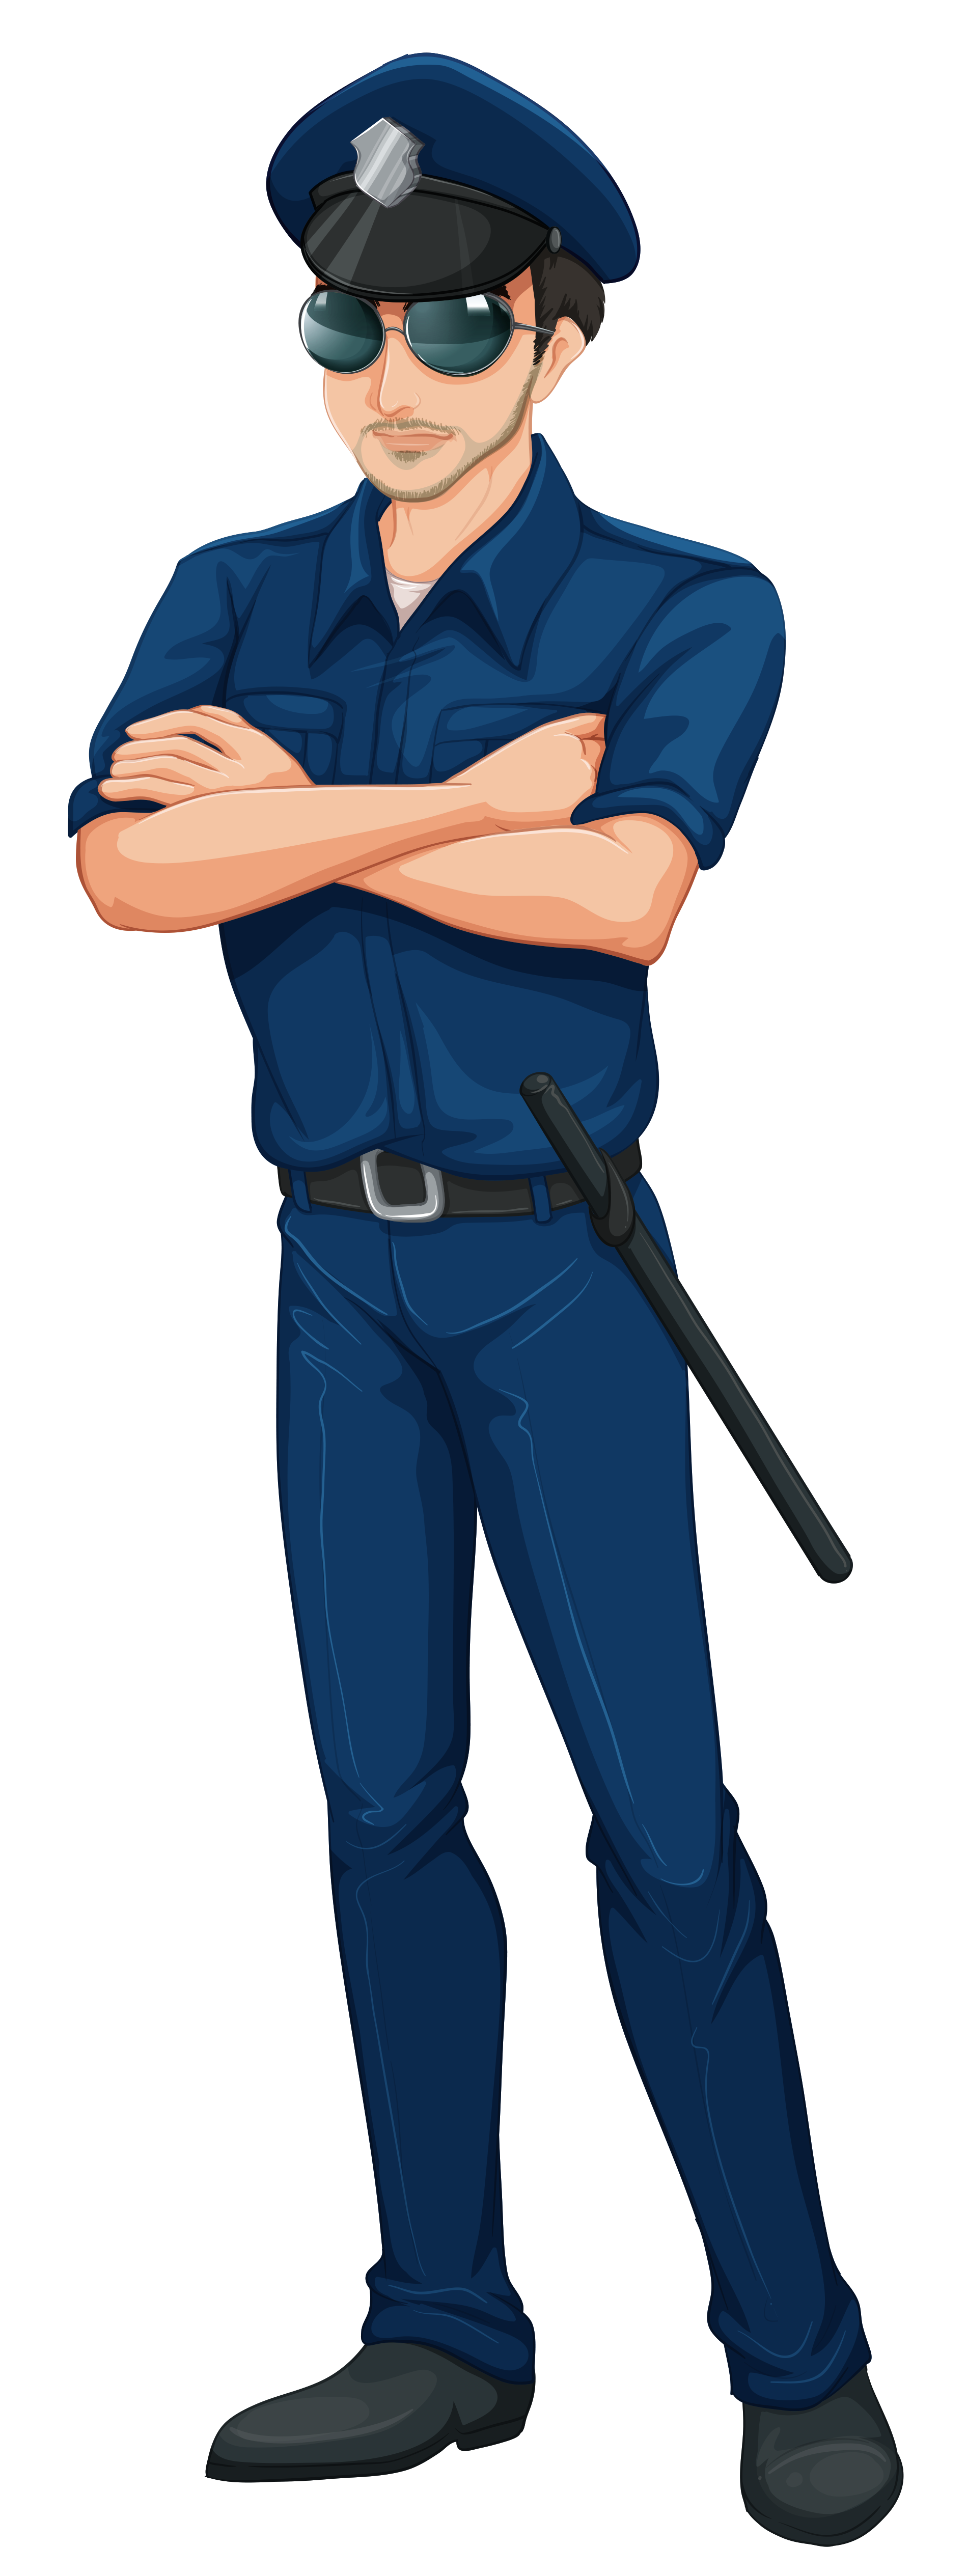 1152 Policeman free clipart.